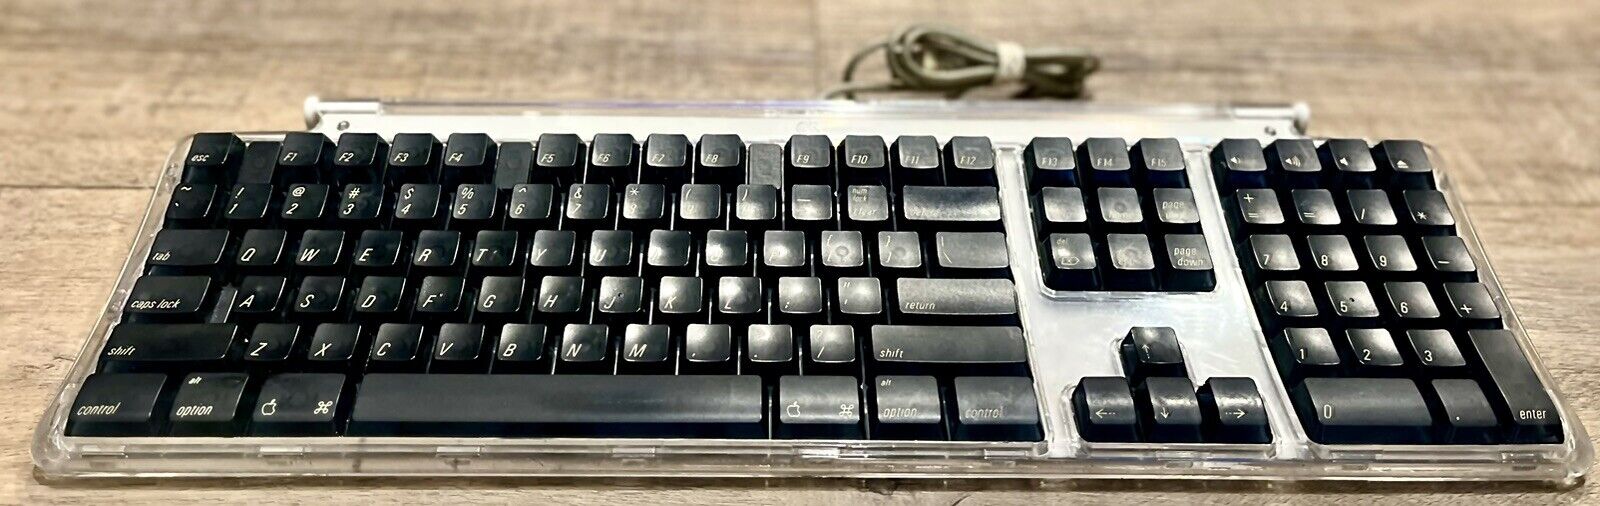 Apple Mac Macintosh M7803 Pro USB Wired Extended Keyboard Clear TESTED Read